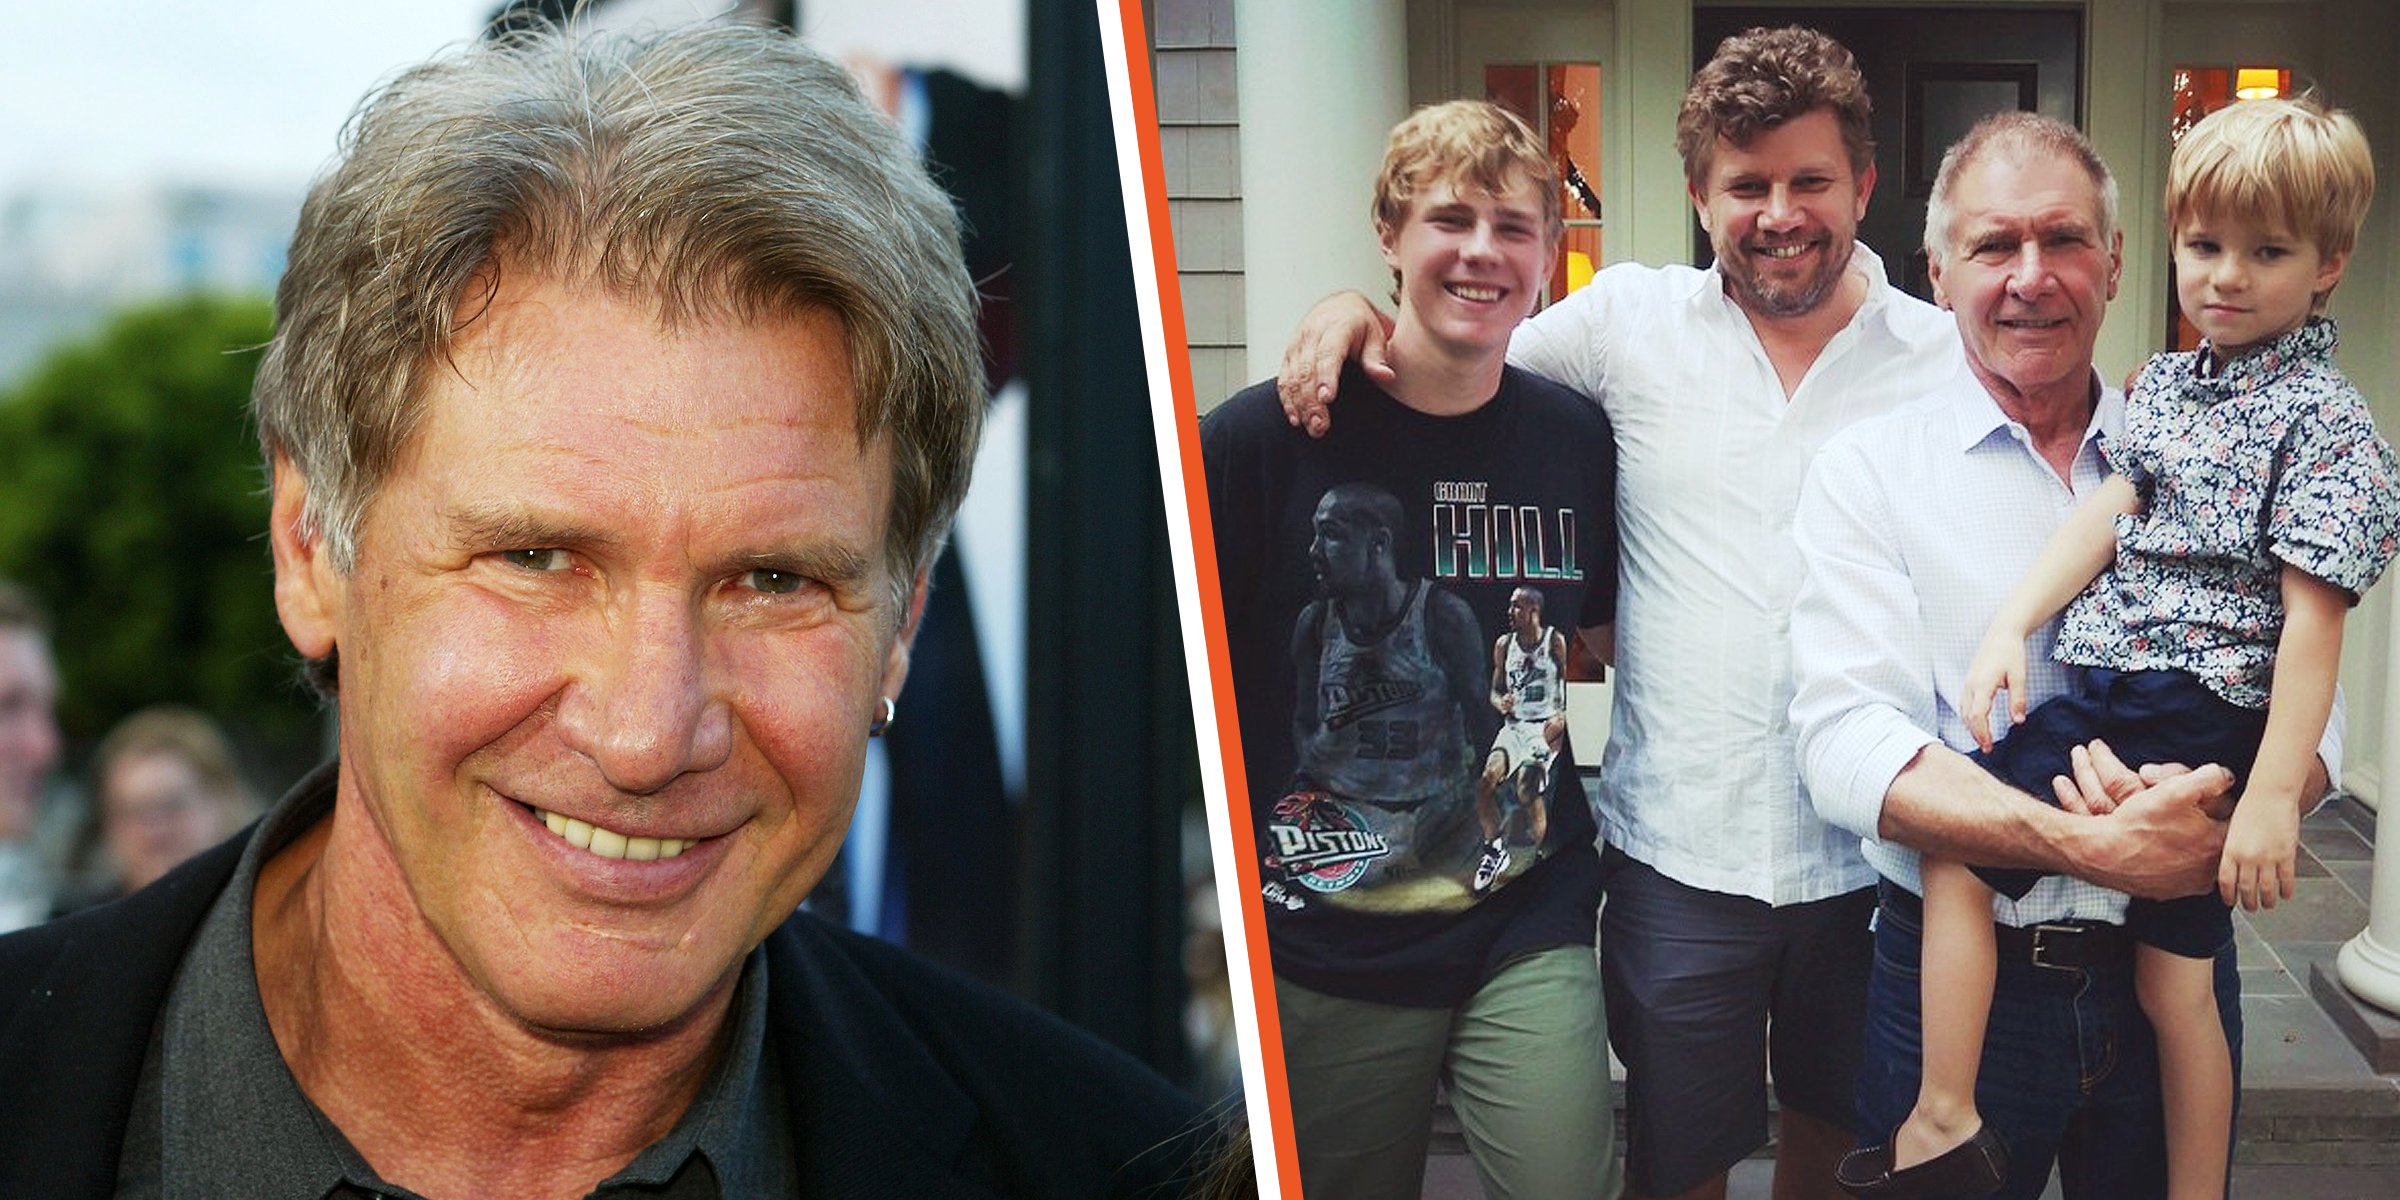 Harrison Ford ┃Ethan, Ben, Harrison and Waylon Ford ┃ Source: instagram.com/chefbenford ┃ Getty Images